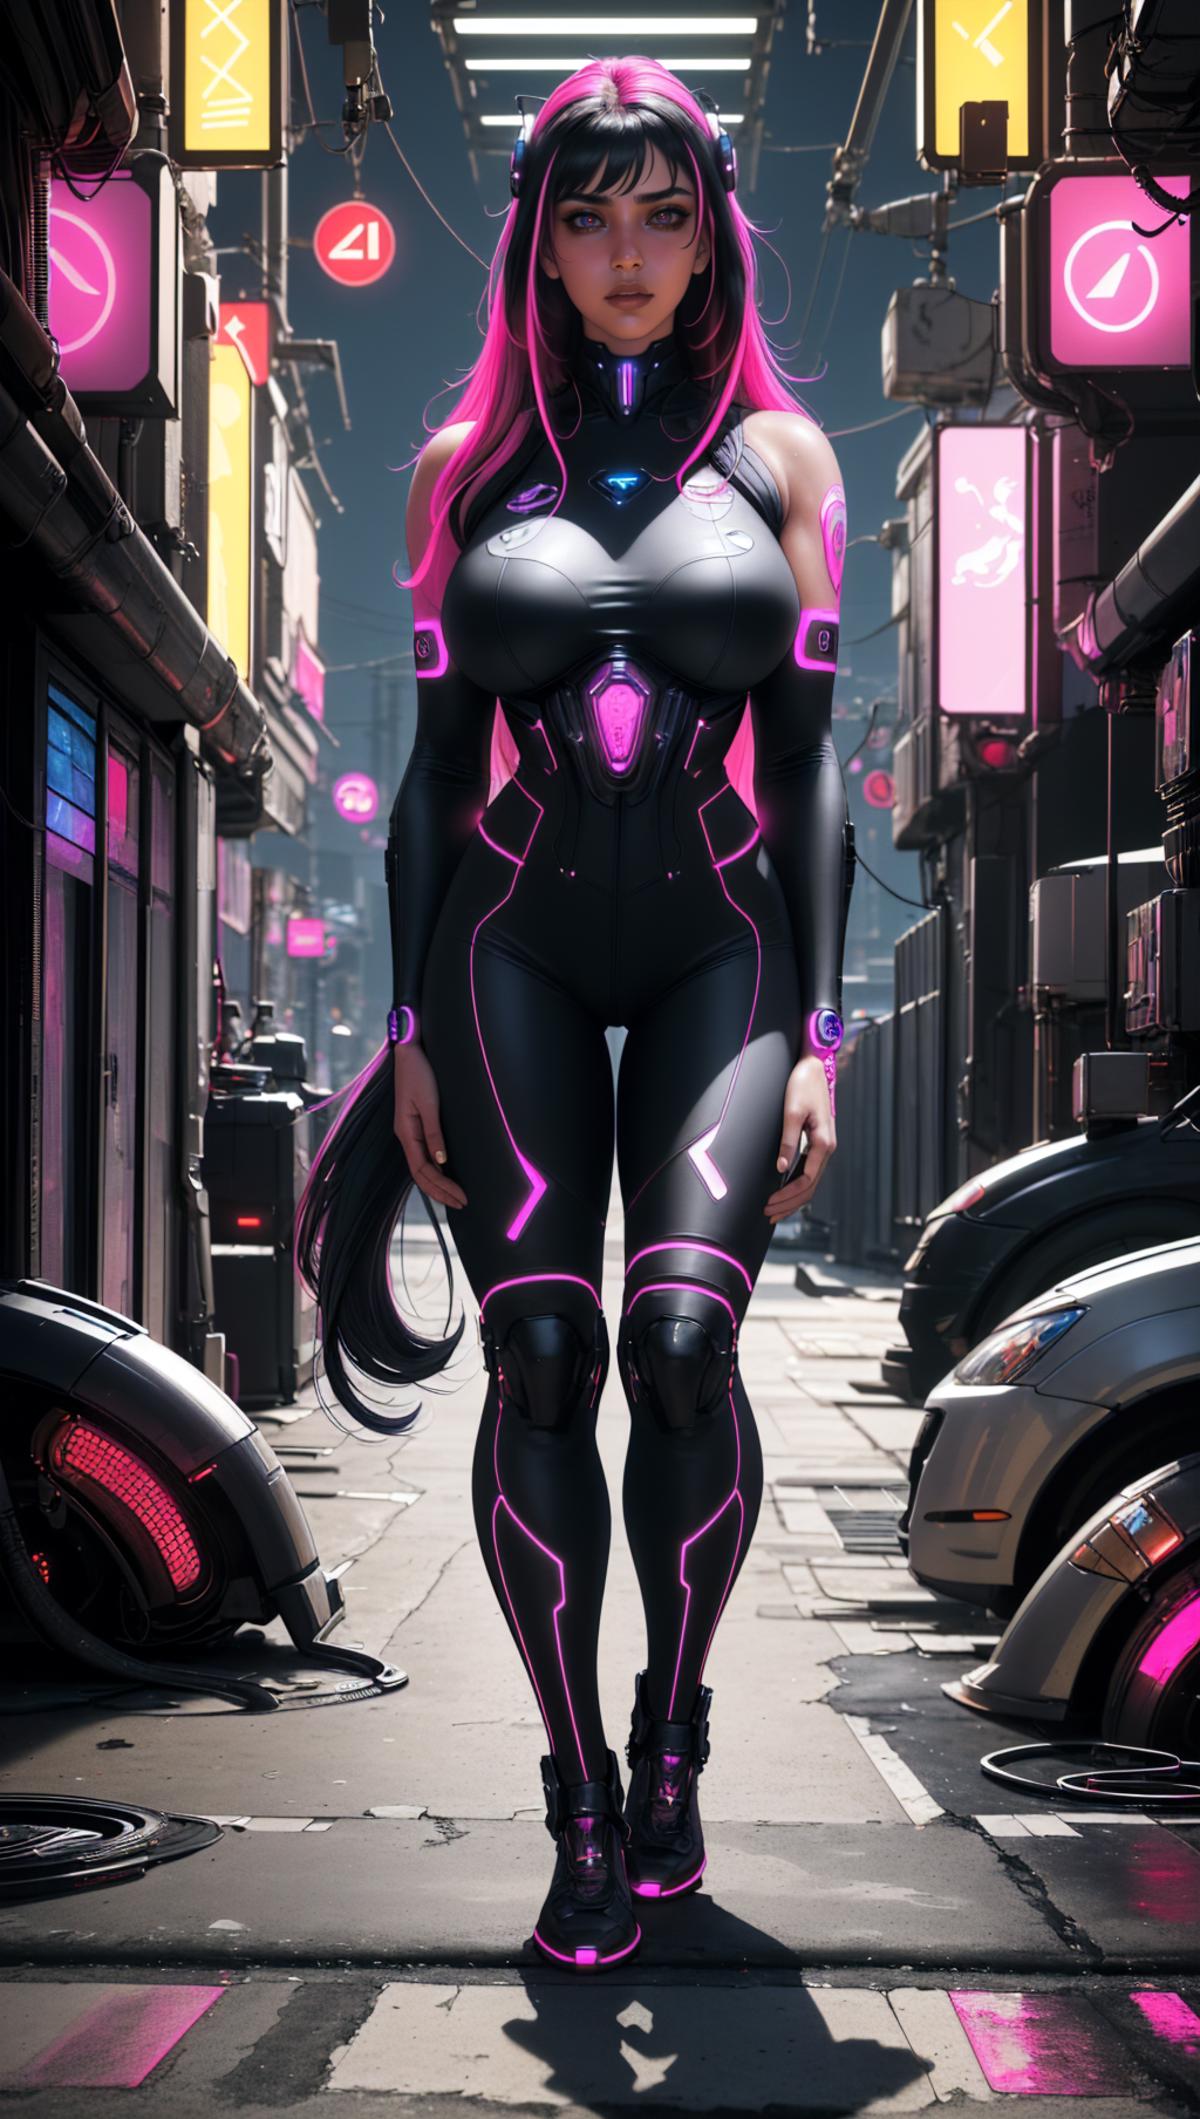 A woman wearing a tight black and pink bodysuit standing in a futuristic city.